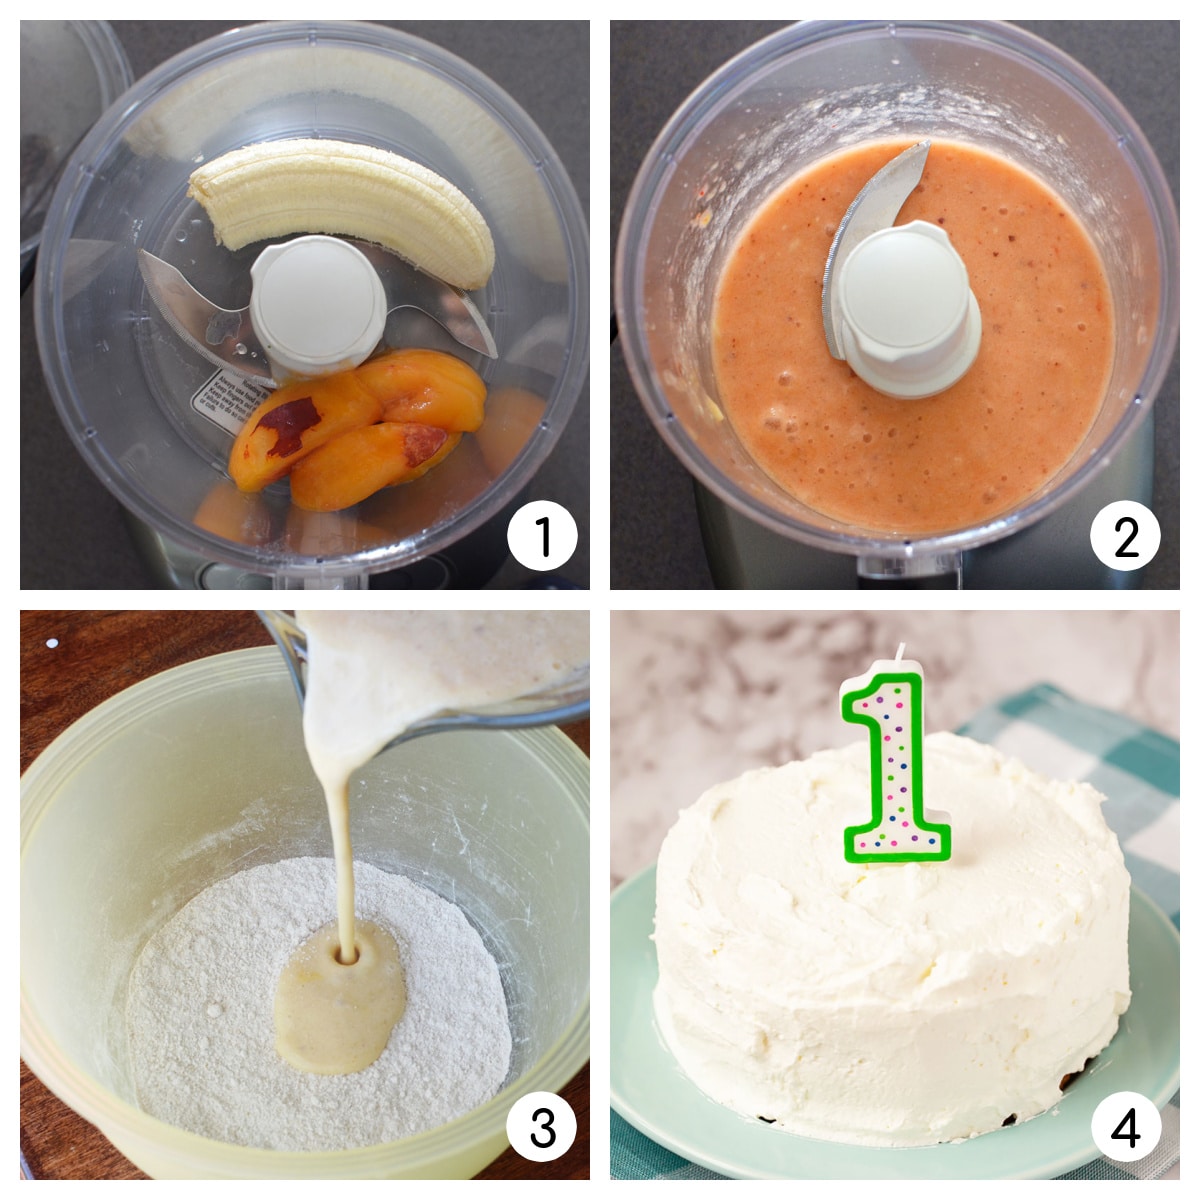 step by step photos to make baby's first birthday cake.  Blending fruit puree, mixing ingredients, frosting cake.